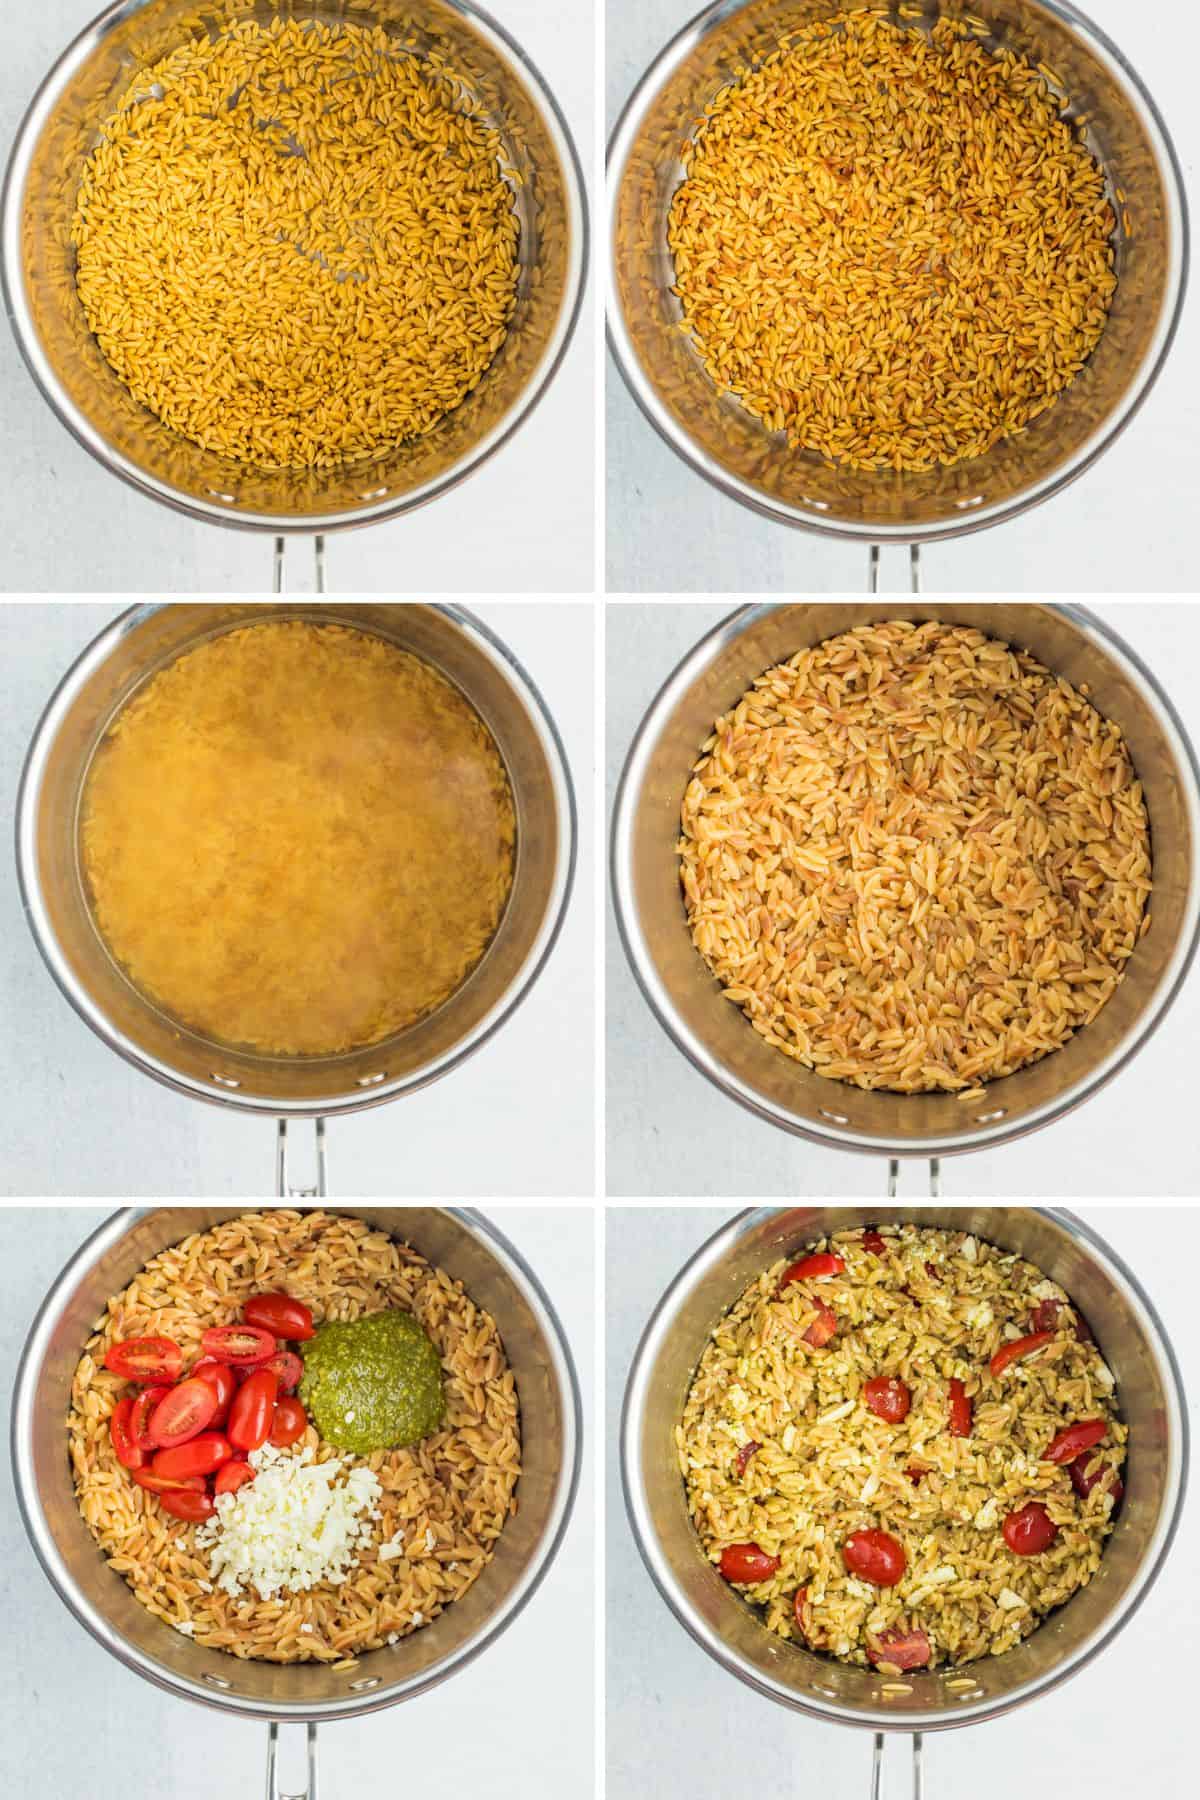 6 photos showing the process of toasting and making an orzo salad.